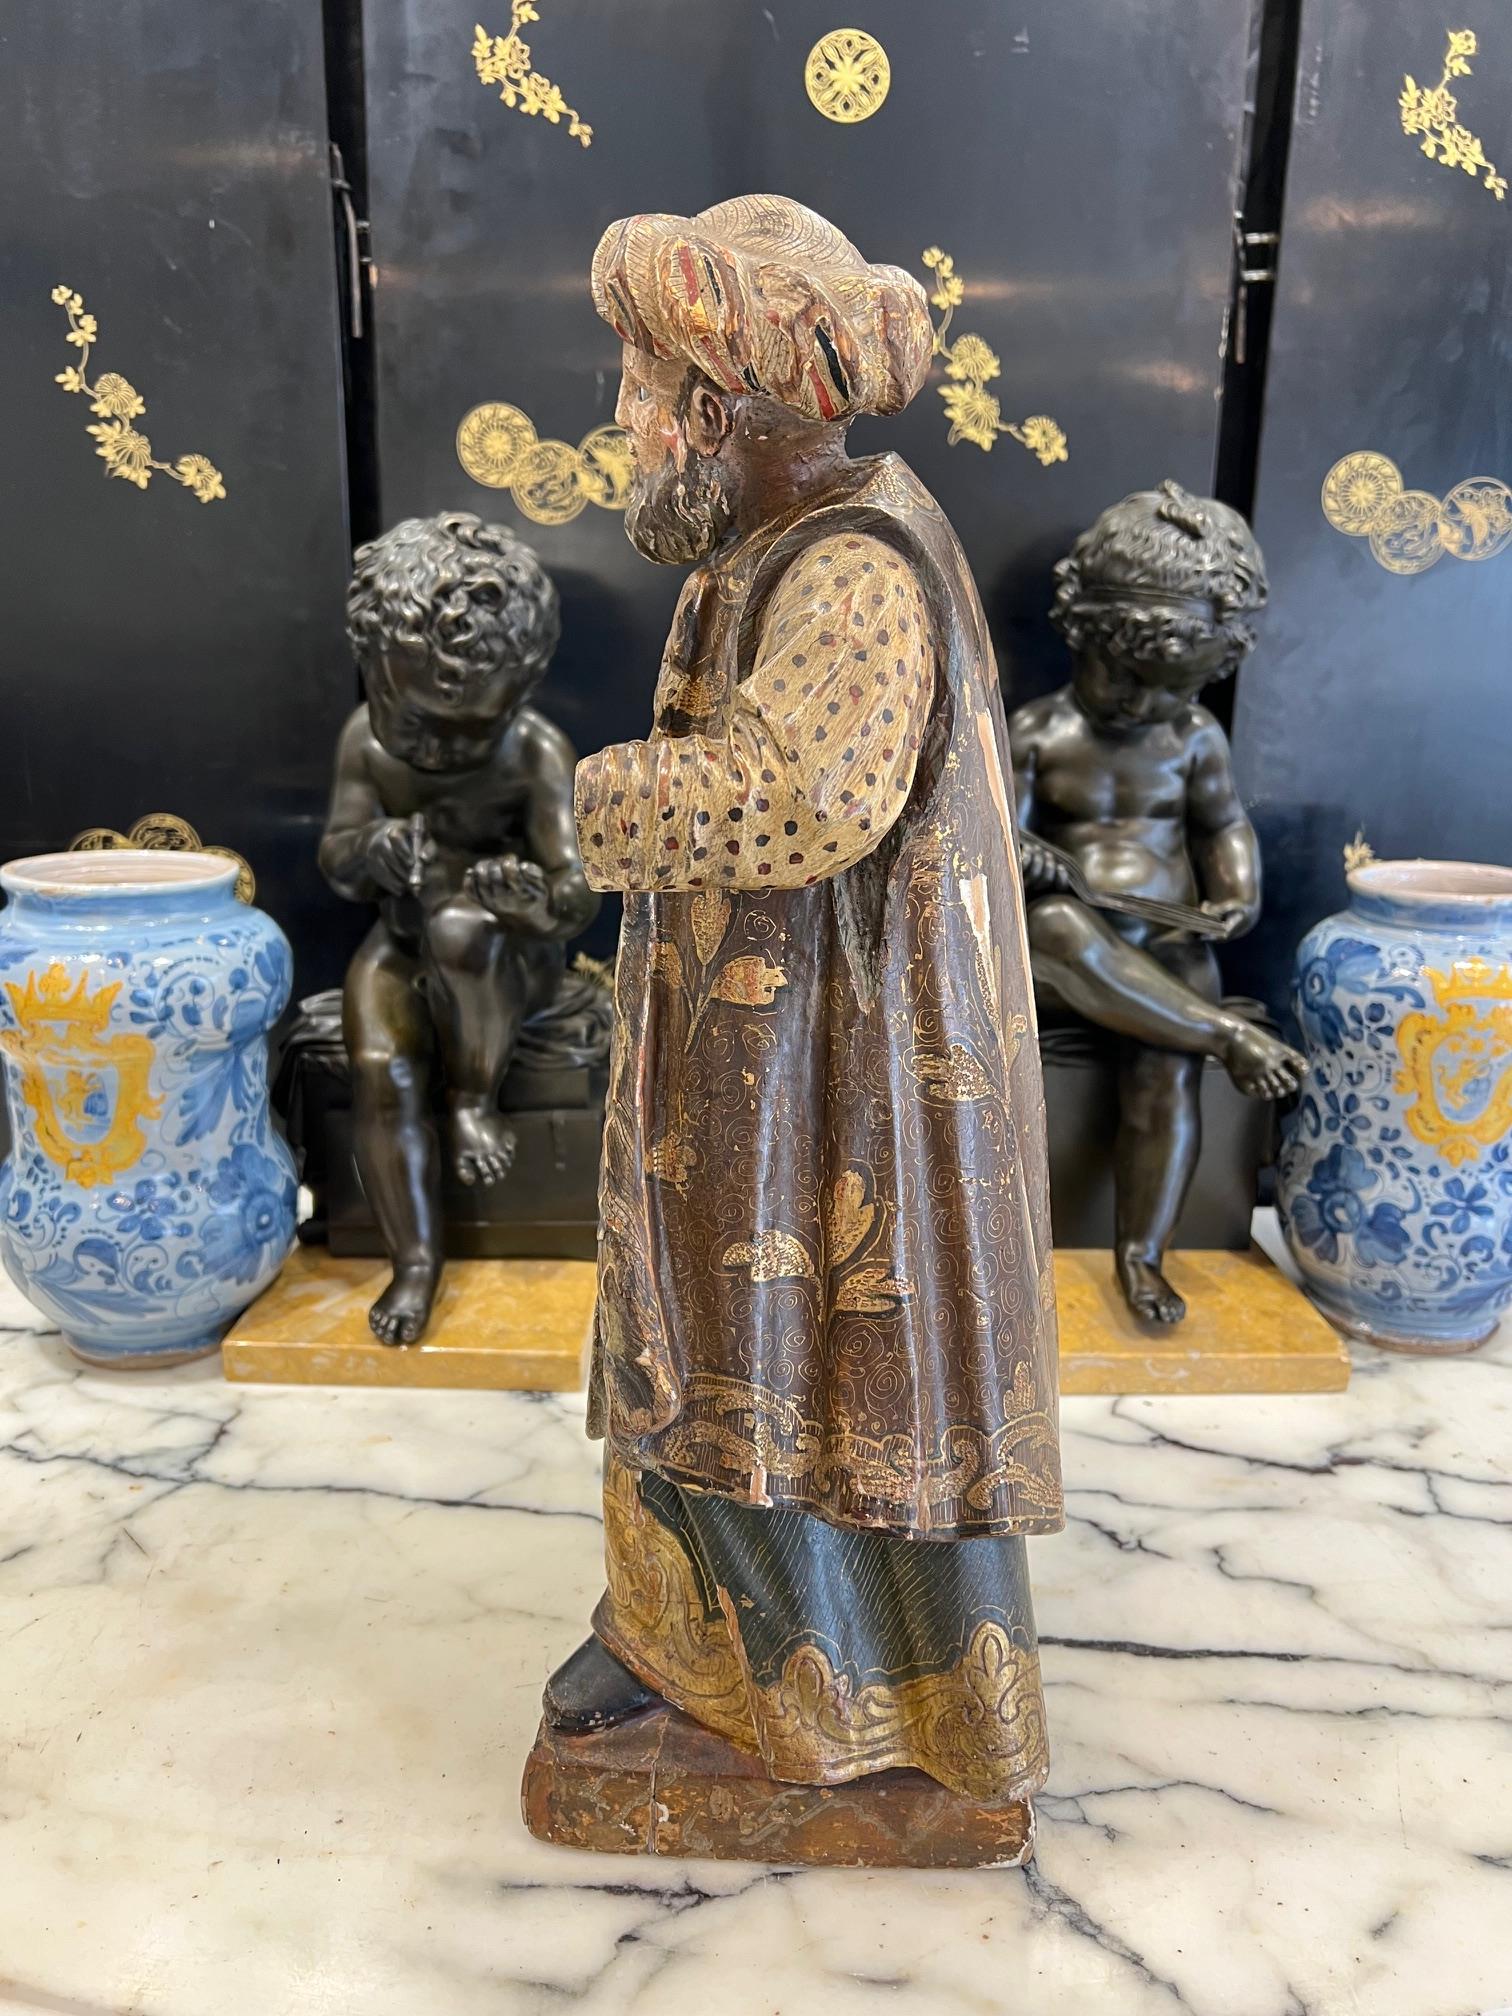 A RARE 18TH CENTURY ITALIAN POLYCHROME DECORATED FIGURE OF AN OTTOMAN - Image 2 of 7